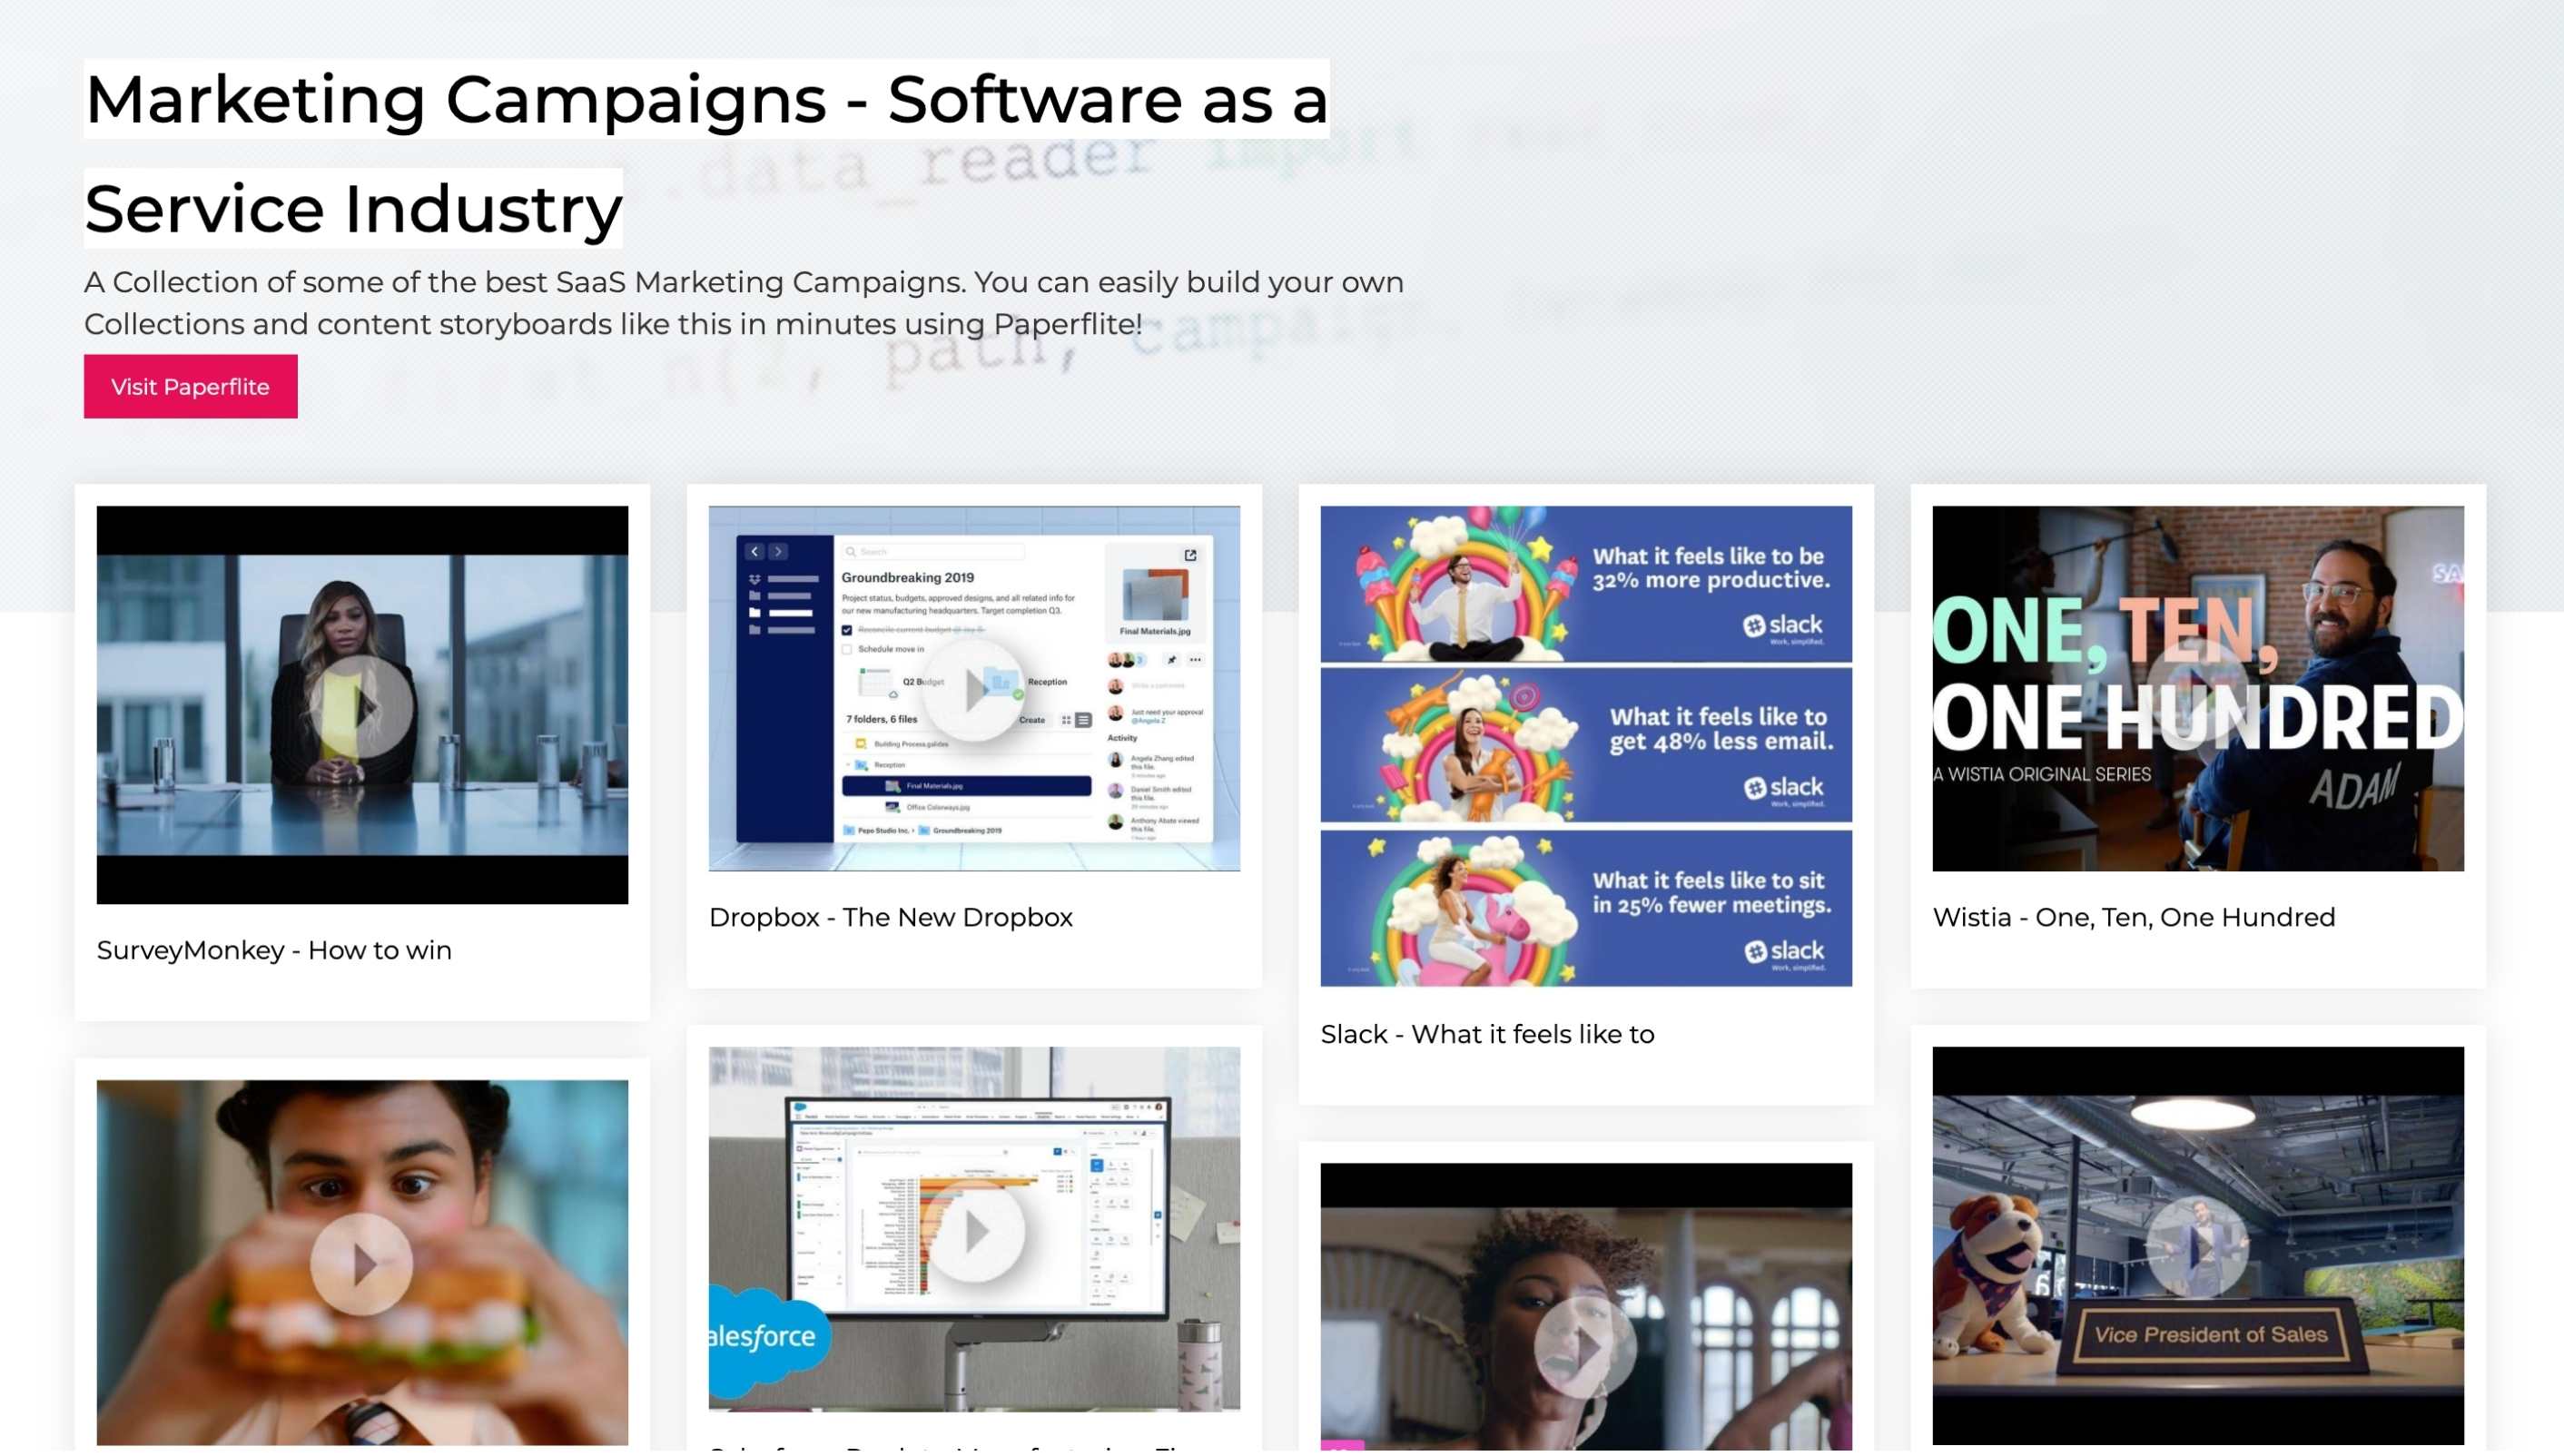 A Paperflite collection of Marketing Campaign examples in the SaaS industry